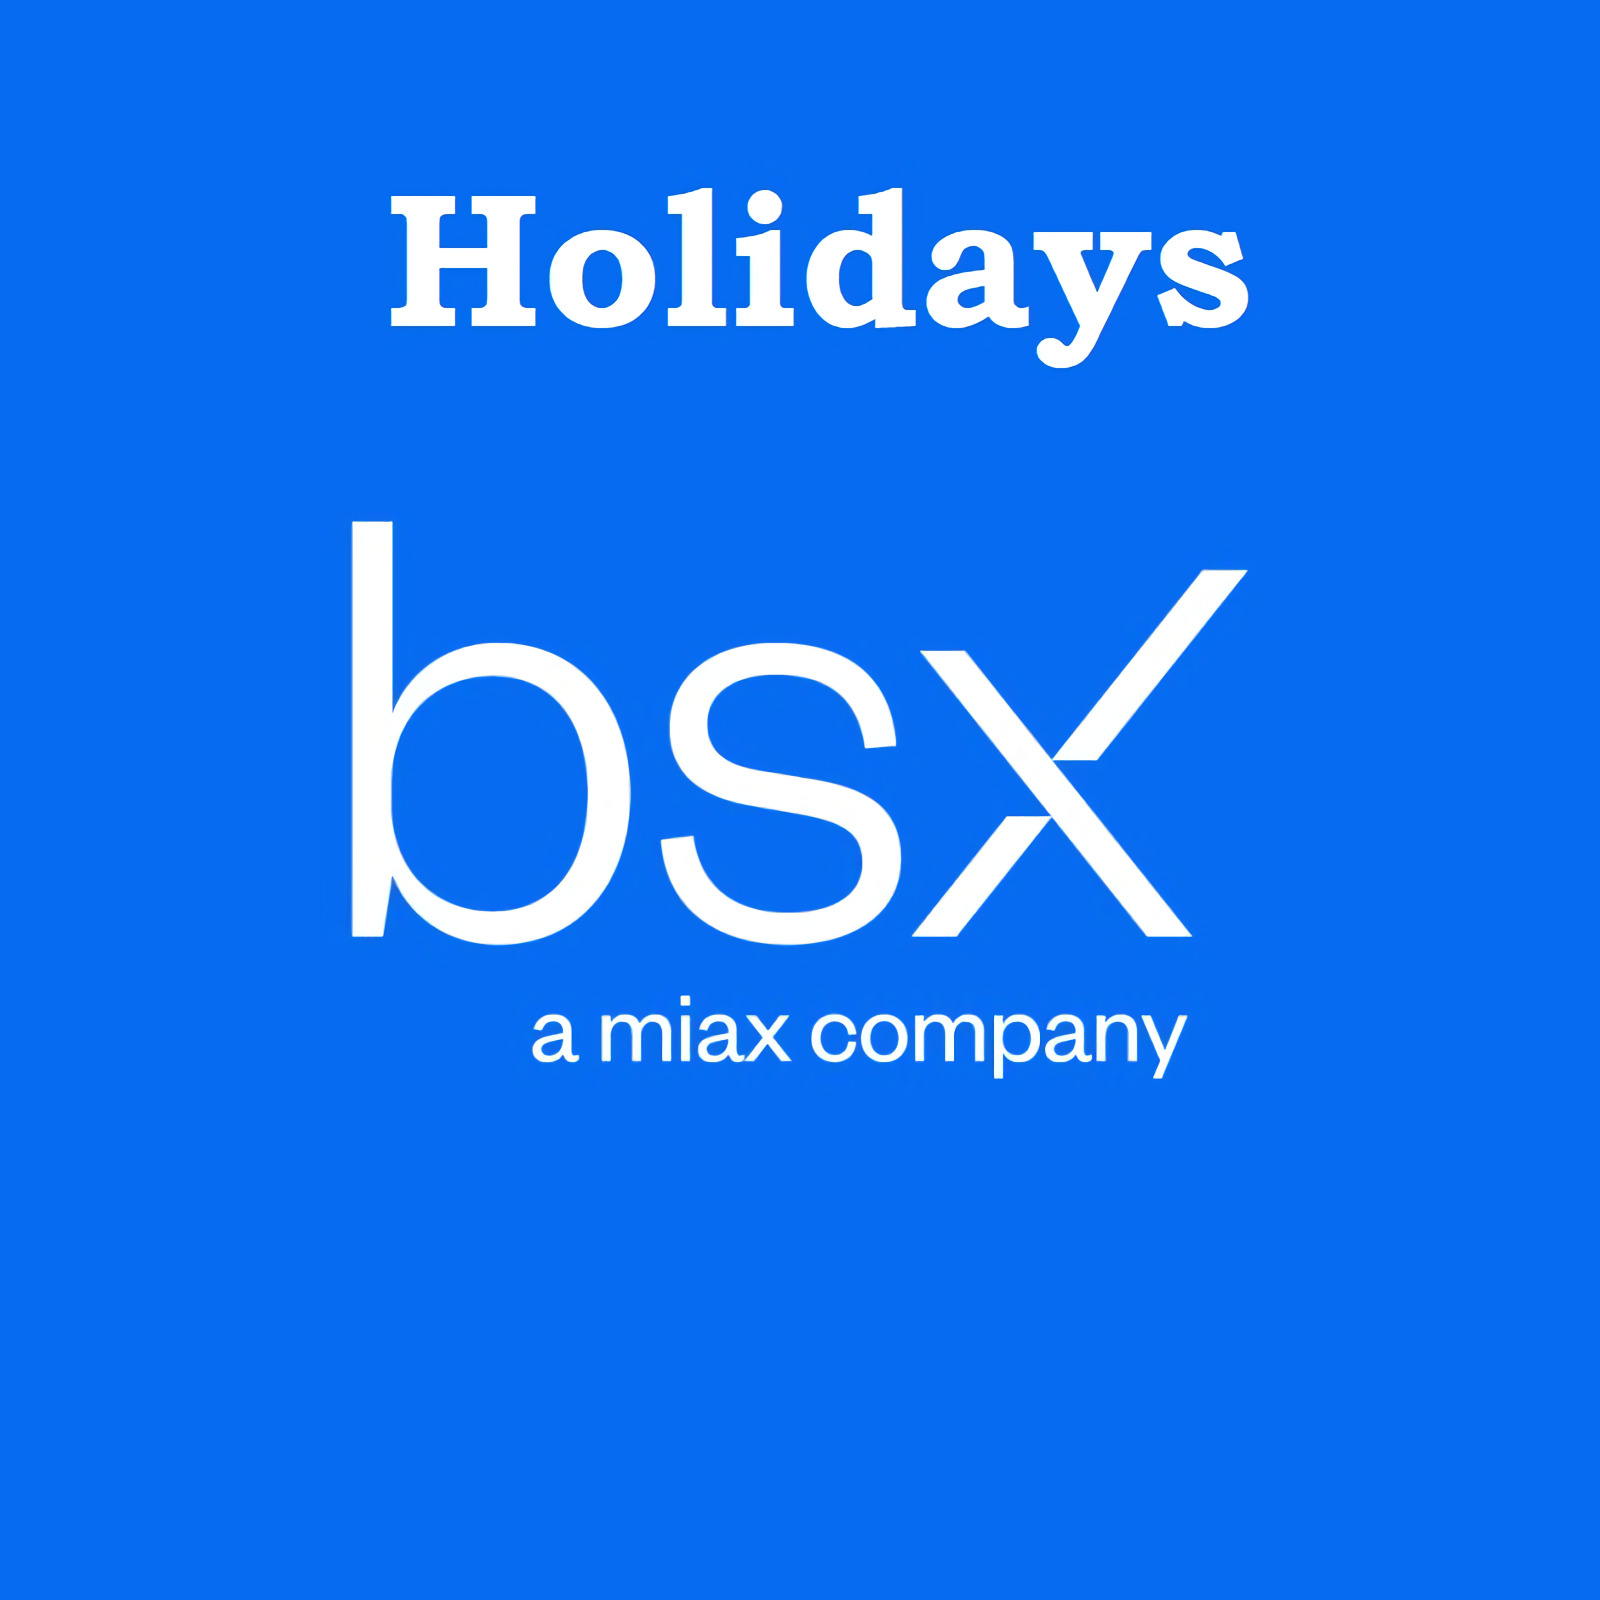 bsx trading holidays in 2023